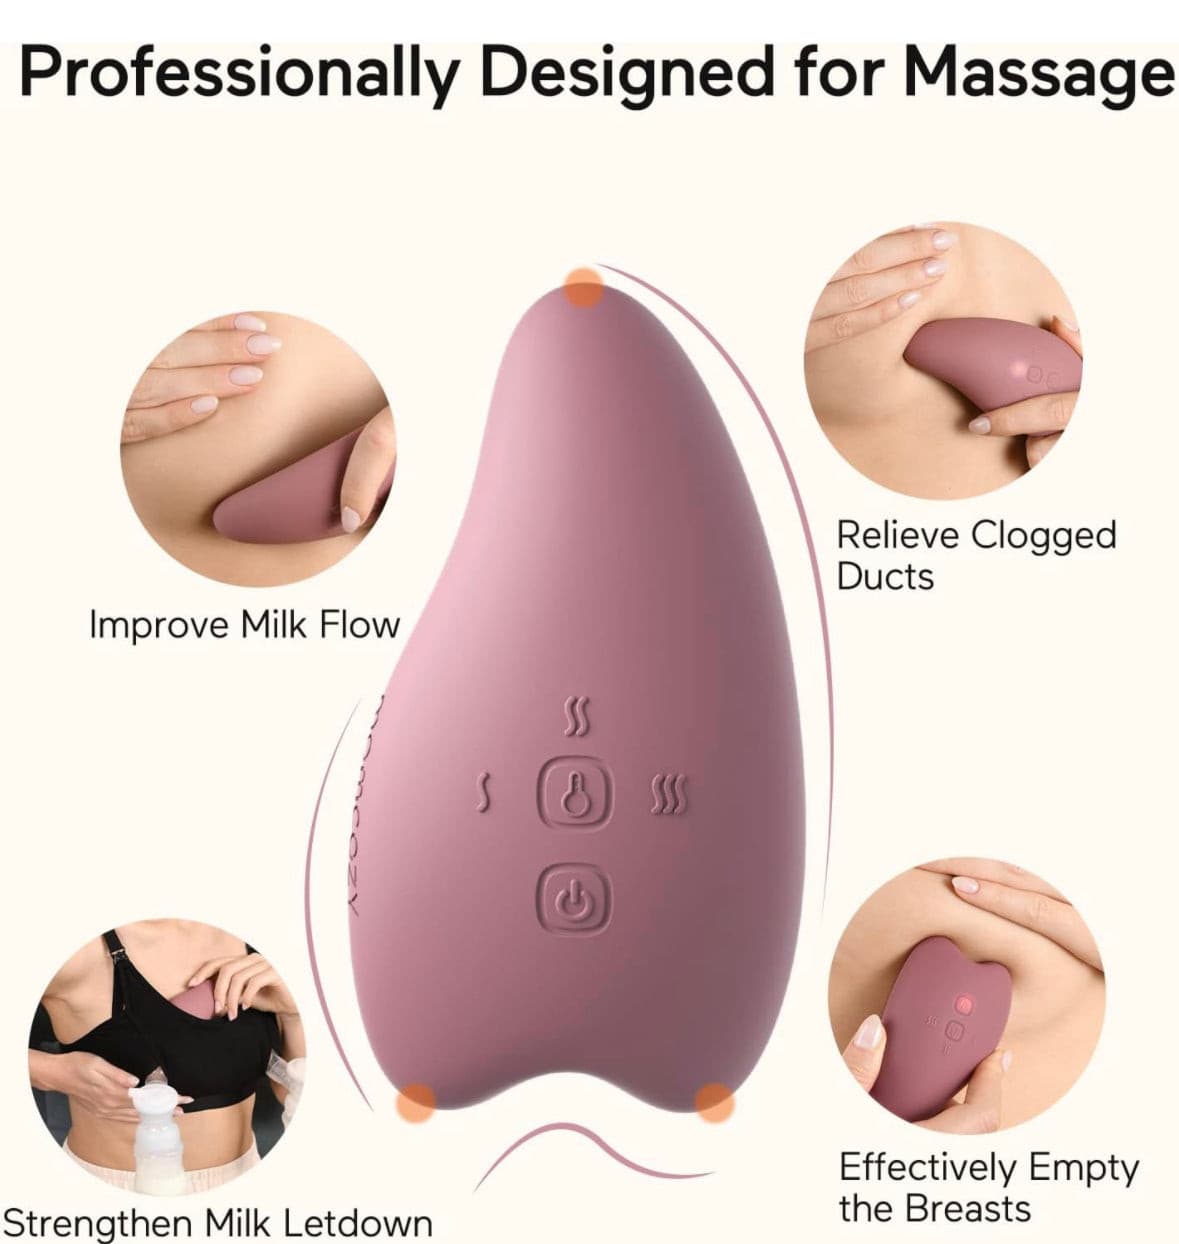 Momcozy Warming Lactation Massager 2-in-1, Soft Breast Massager for Breastfeeding, Heat + Vibration Adjustable for Clogged Ducts, Improve Milk Flow.